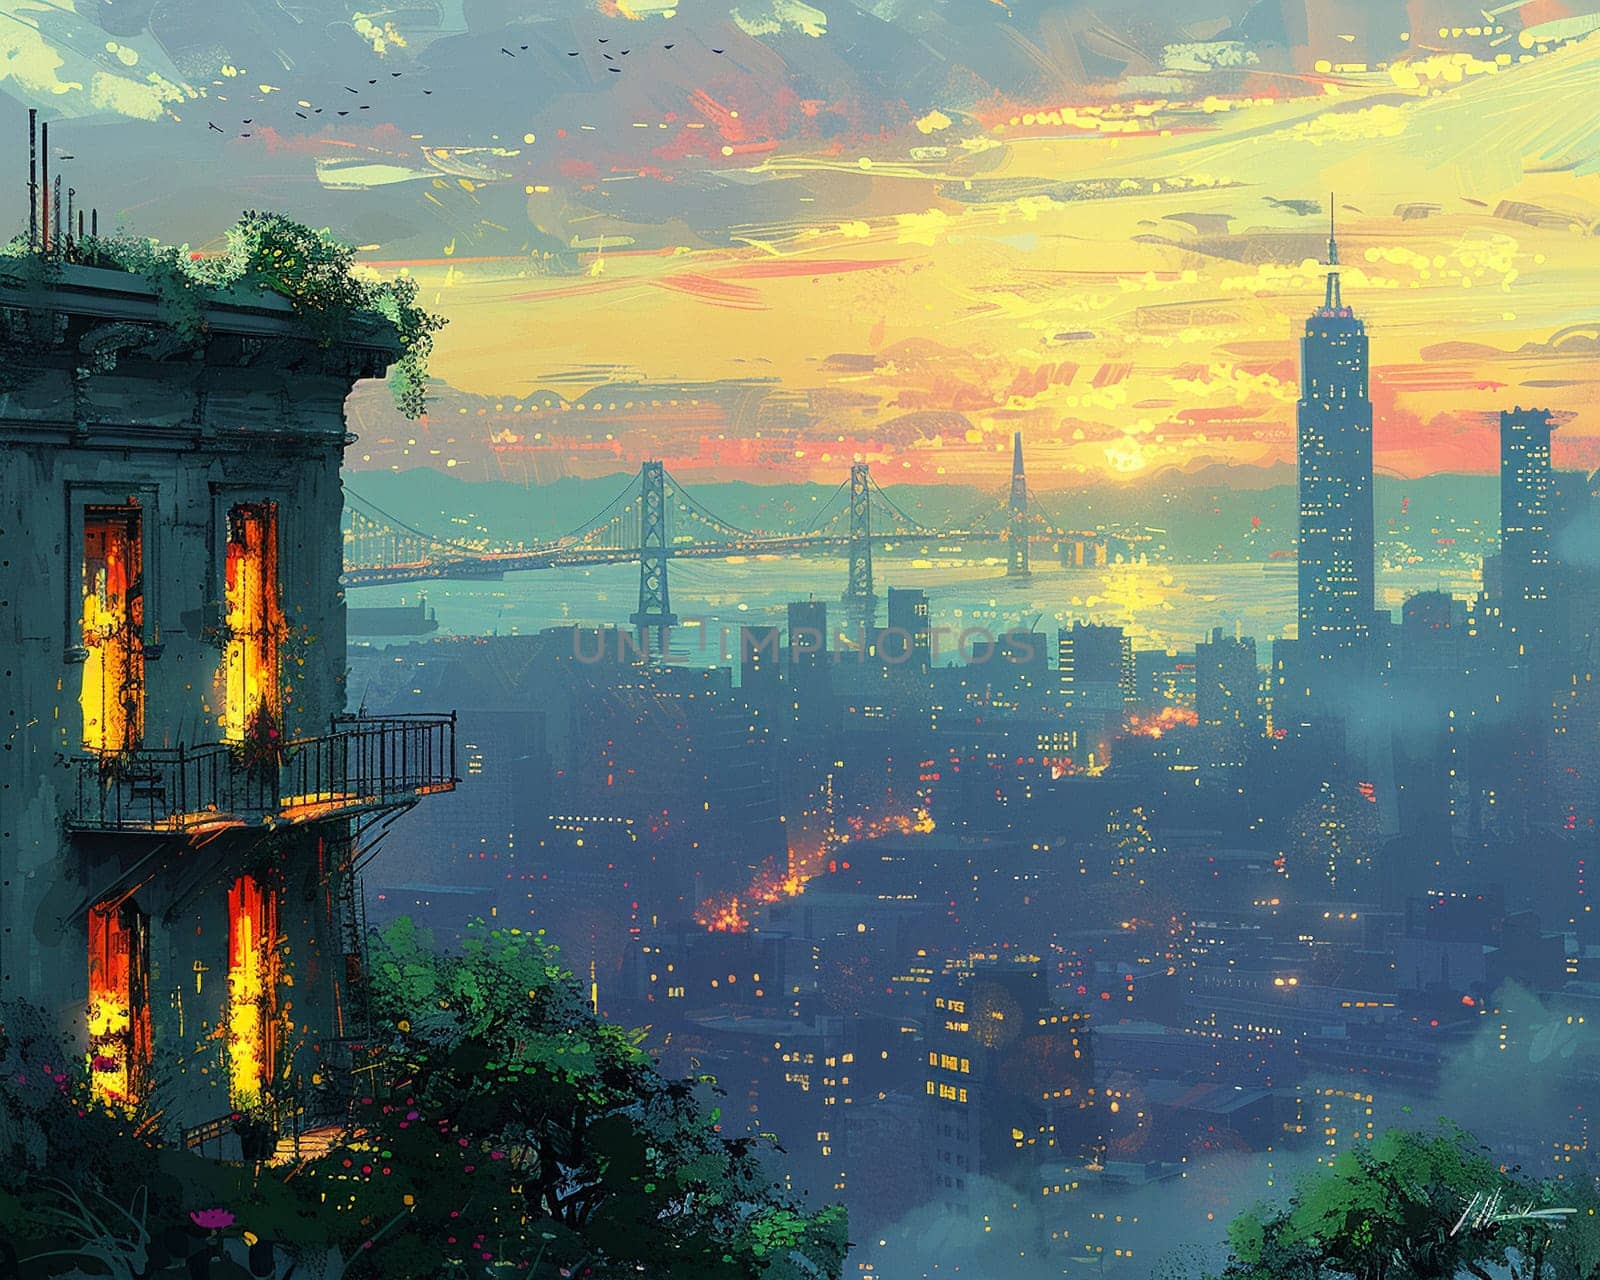 City overlook rendered in an expressive painterly style by Benzoix